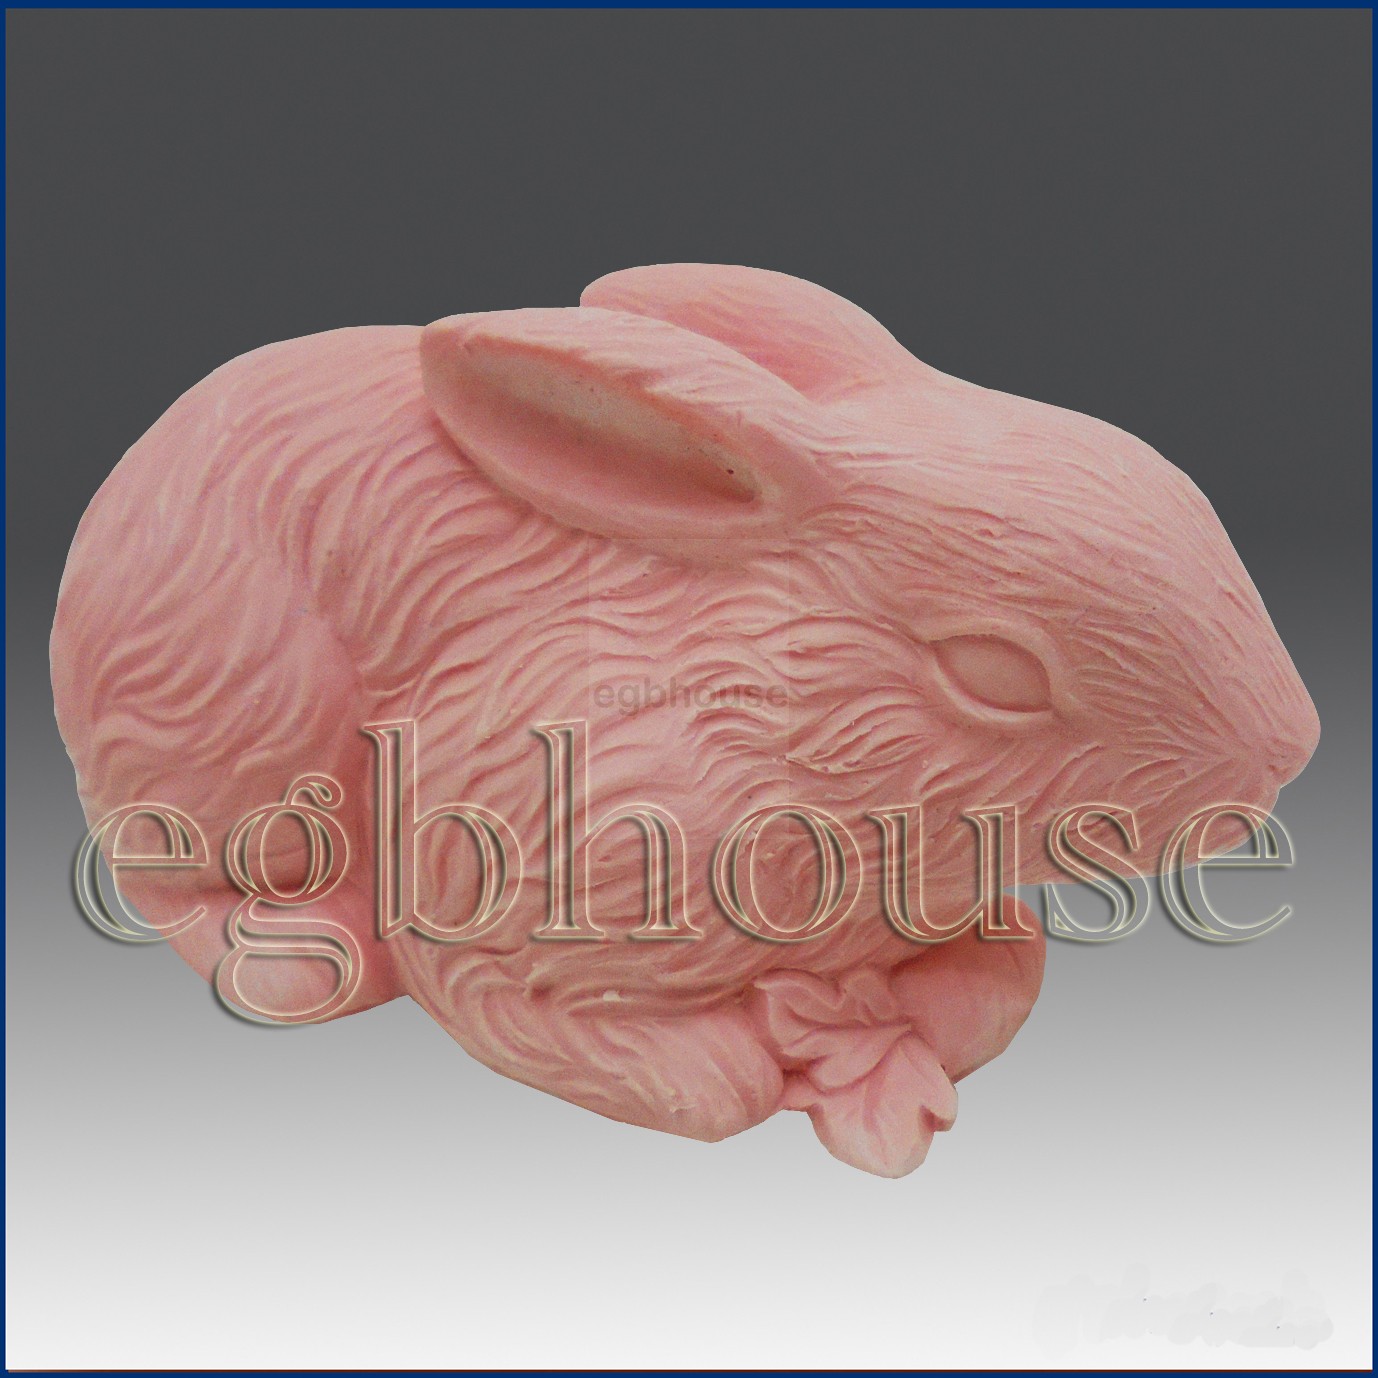 Cuddly Bunny Rabbit  - 3D Soap and Candle Mold